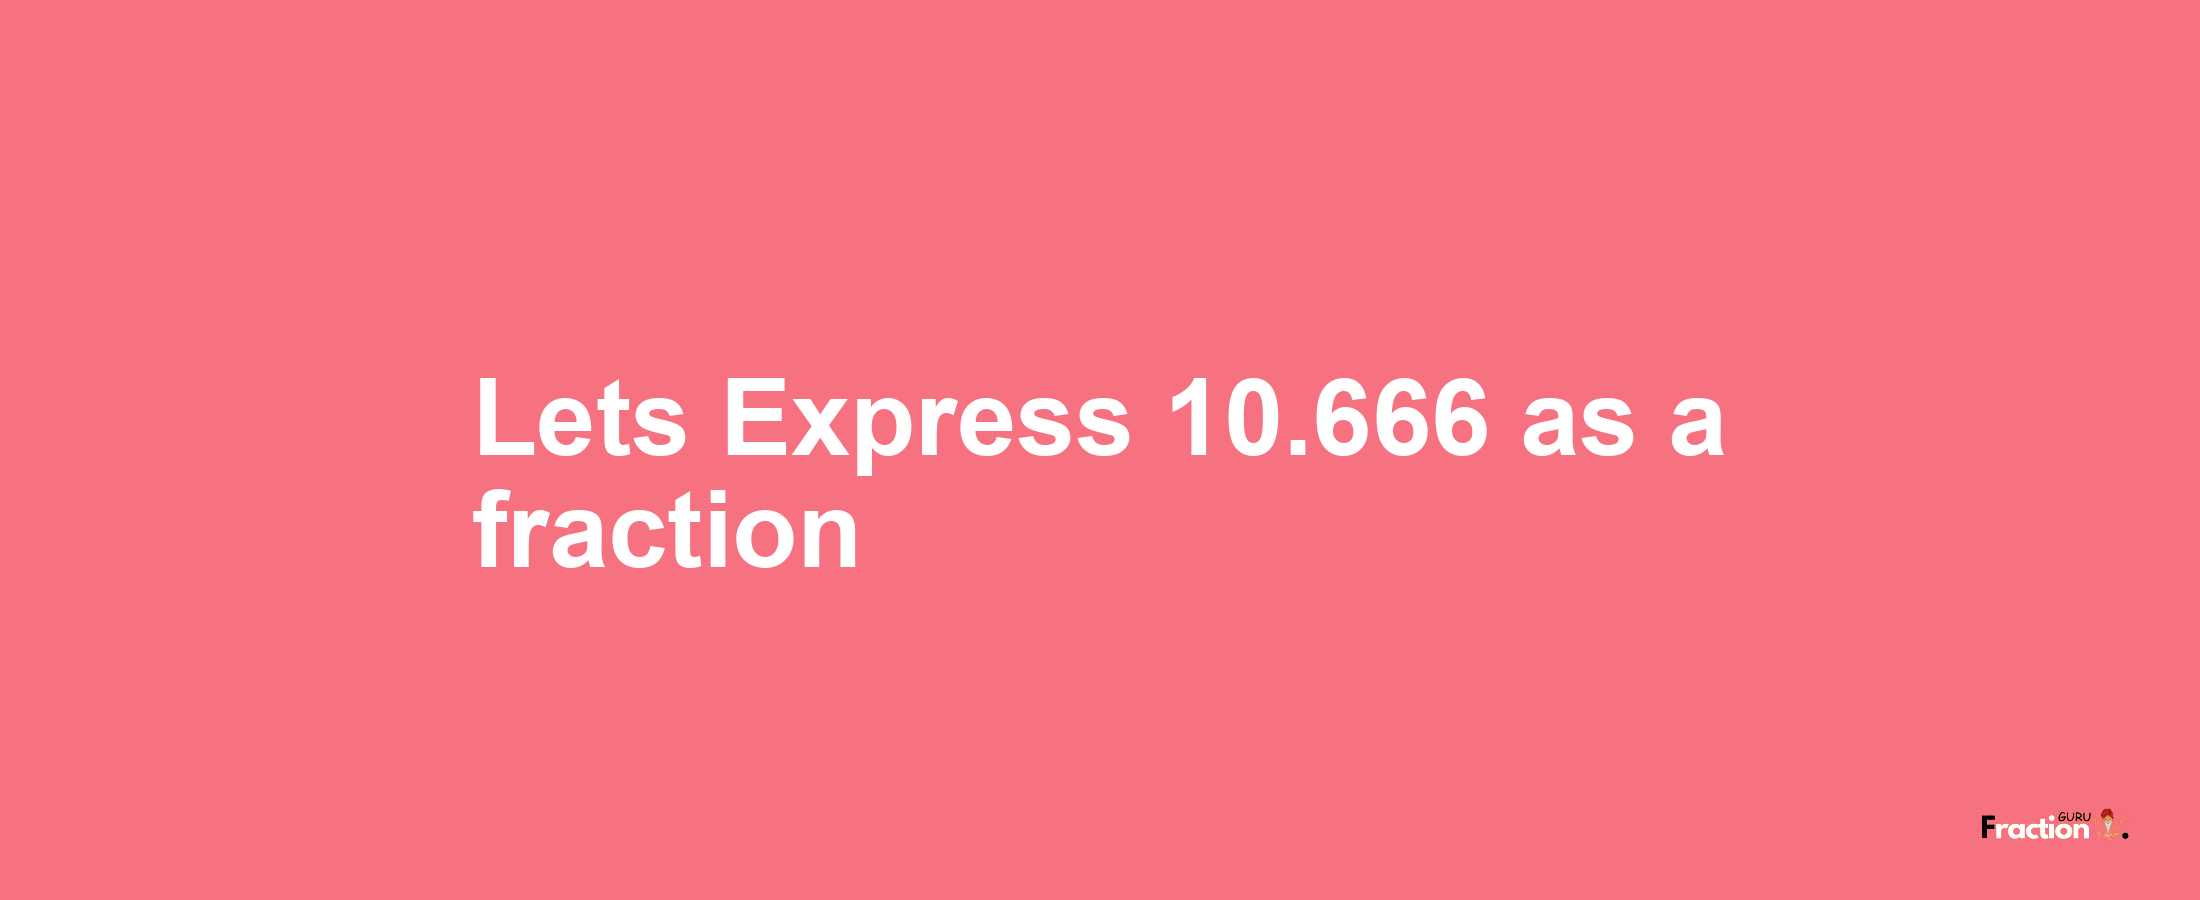 Lets Express 10.666 as afraction